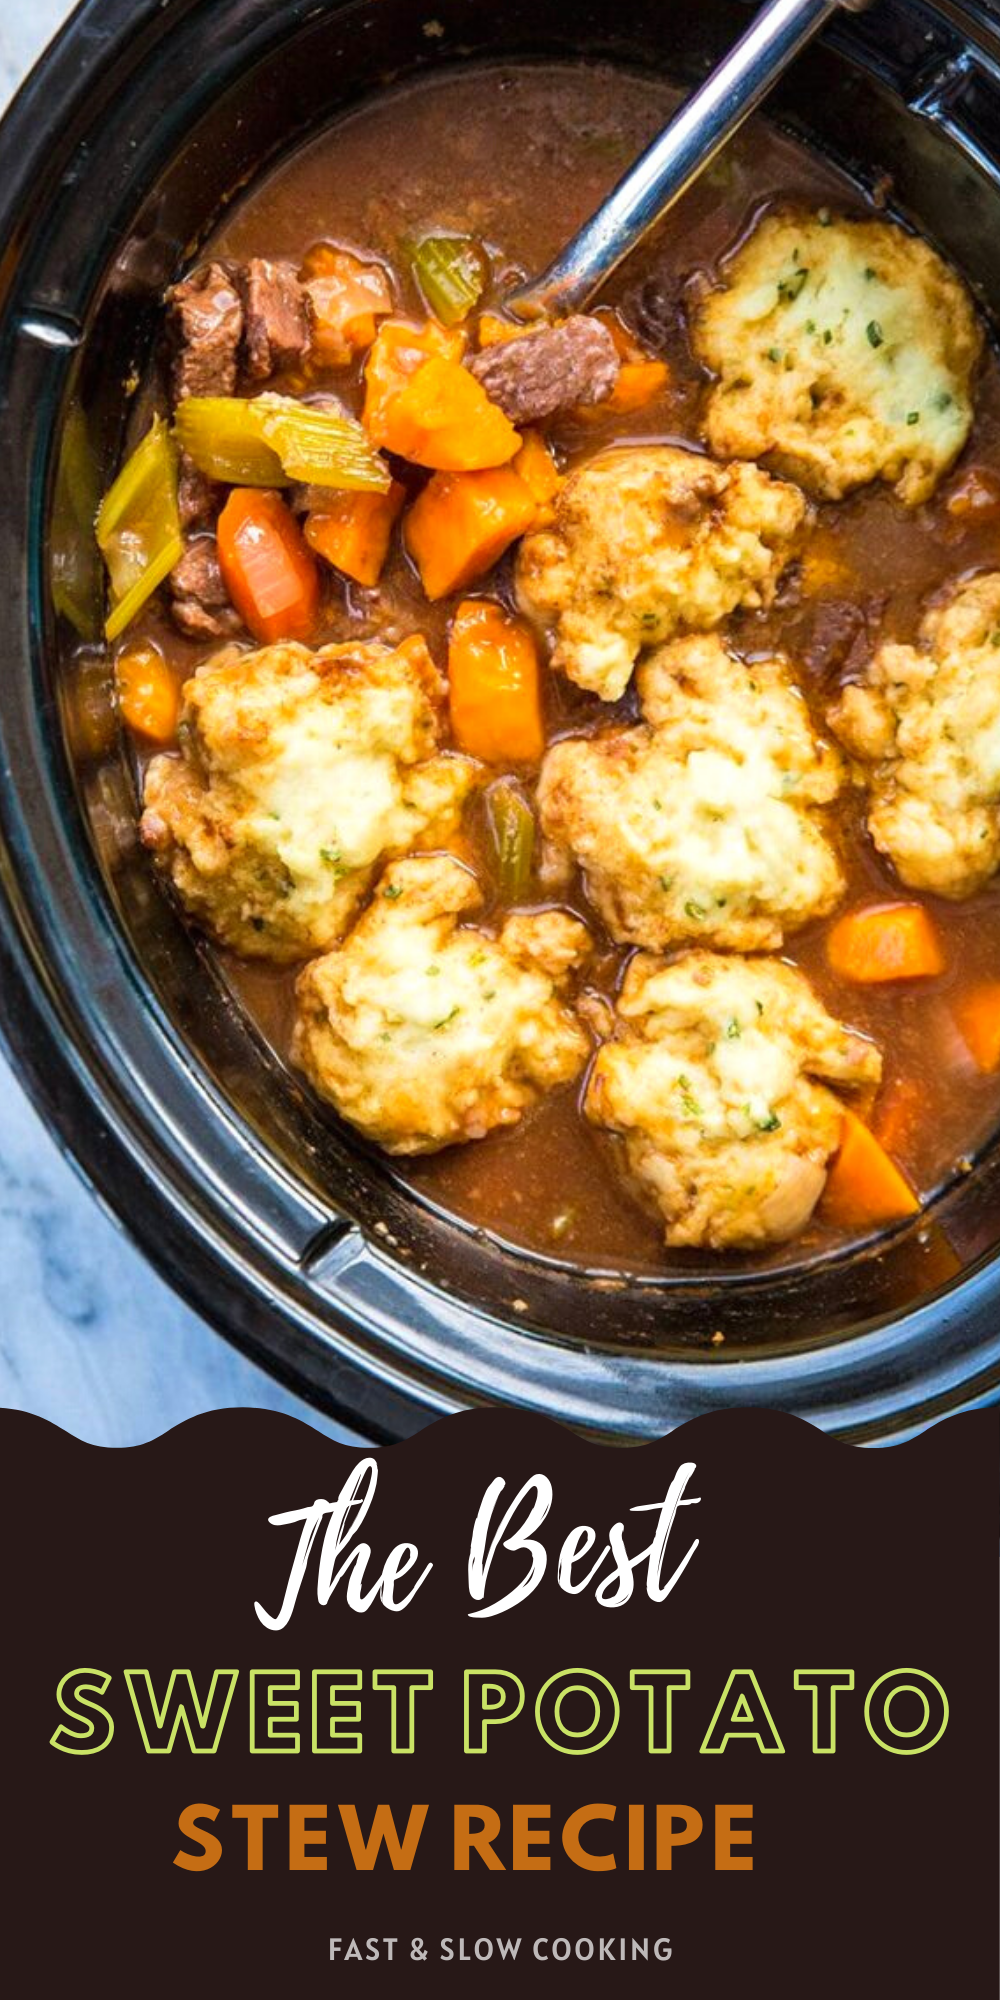 This Slow Cooker Beef & Sweet Potato Stew proves that you don't need normal potatoes to make one amazing stew!